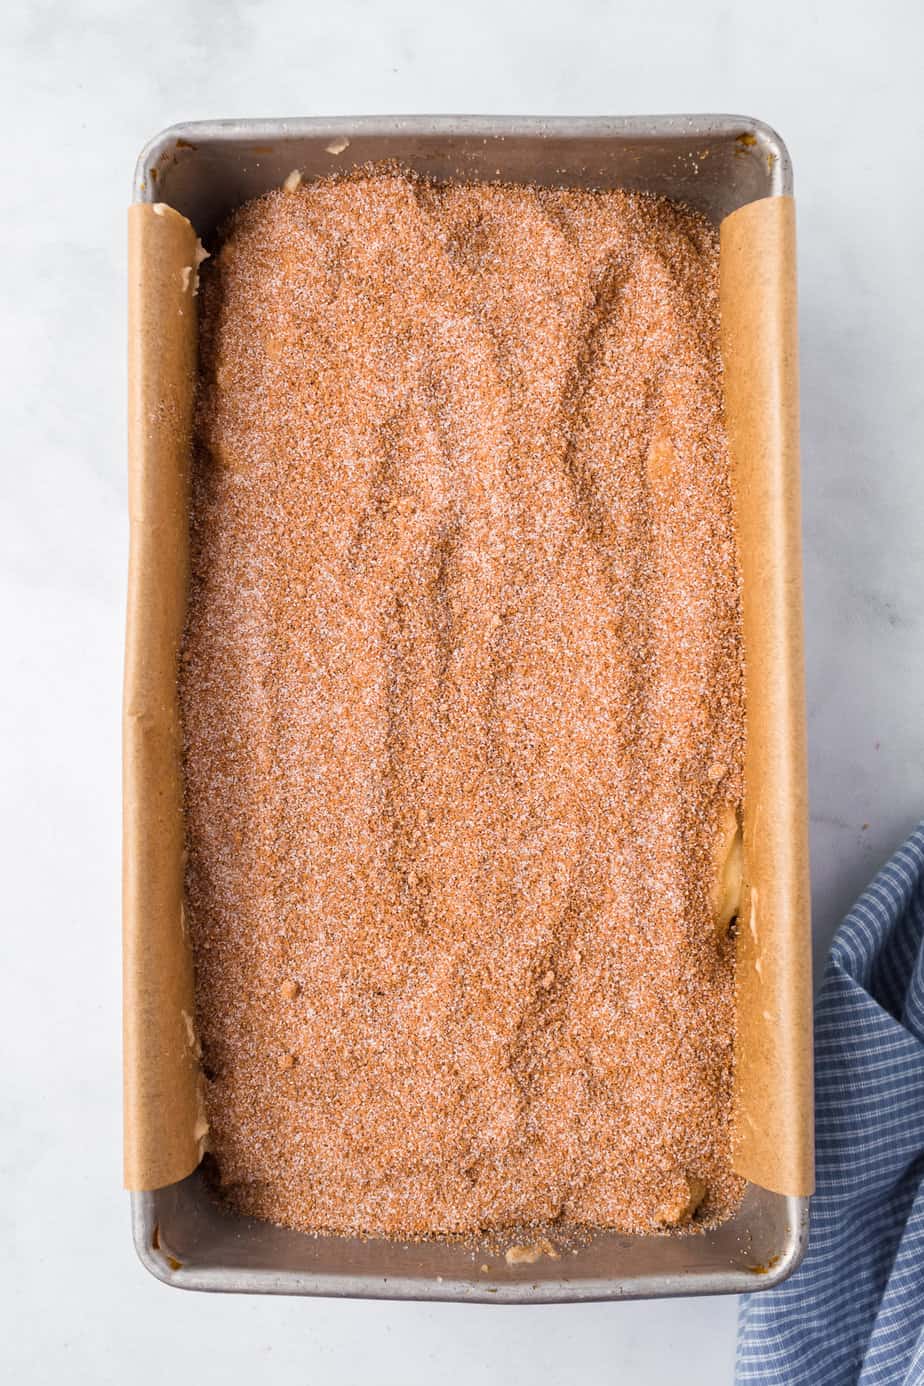 Layered batter topped with cinnamon sugar in a loaf pan from above on a counter.